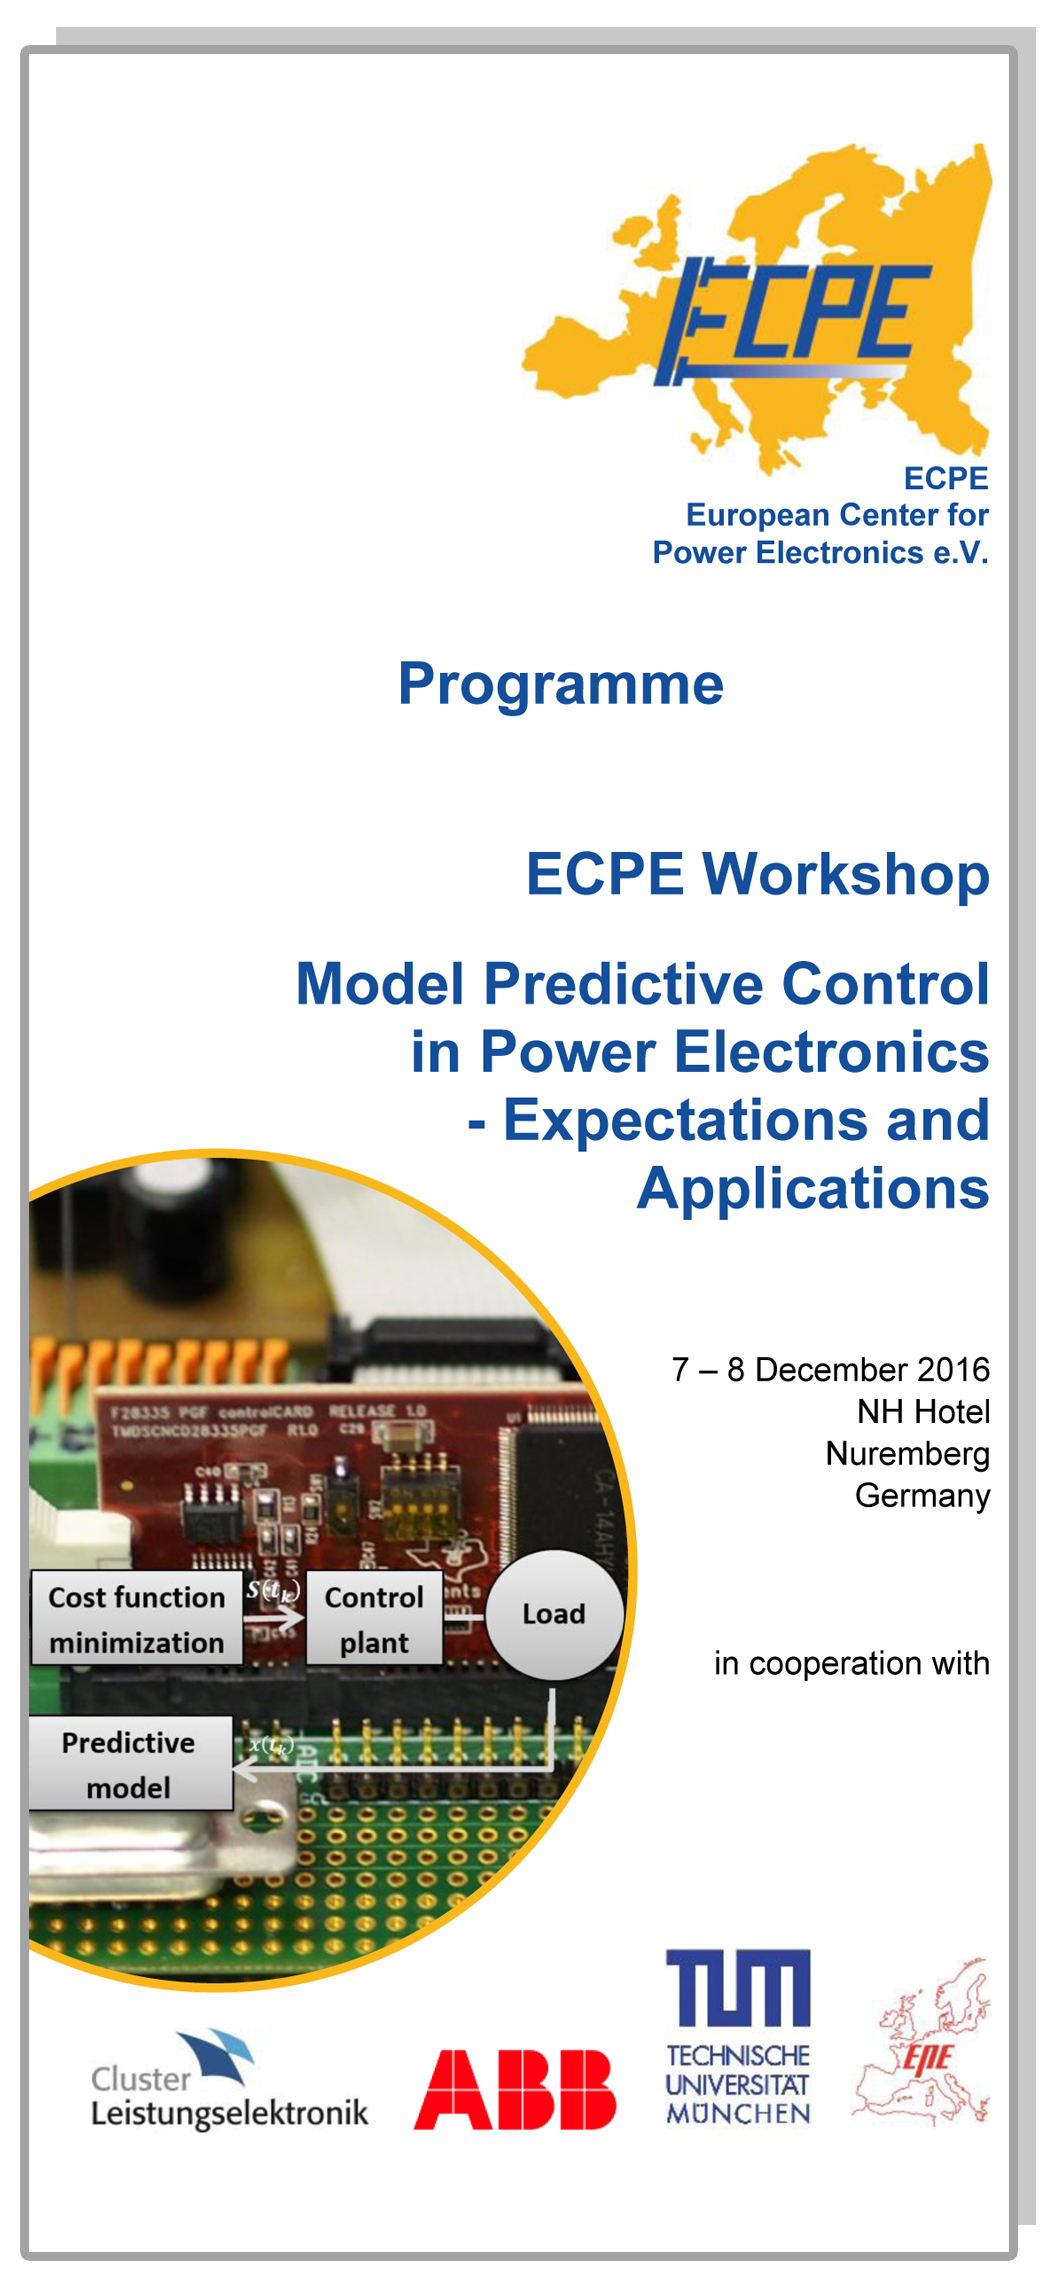 ECPE Workshop: Model Predictive Control in Power Electronics